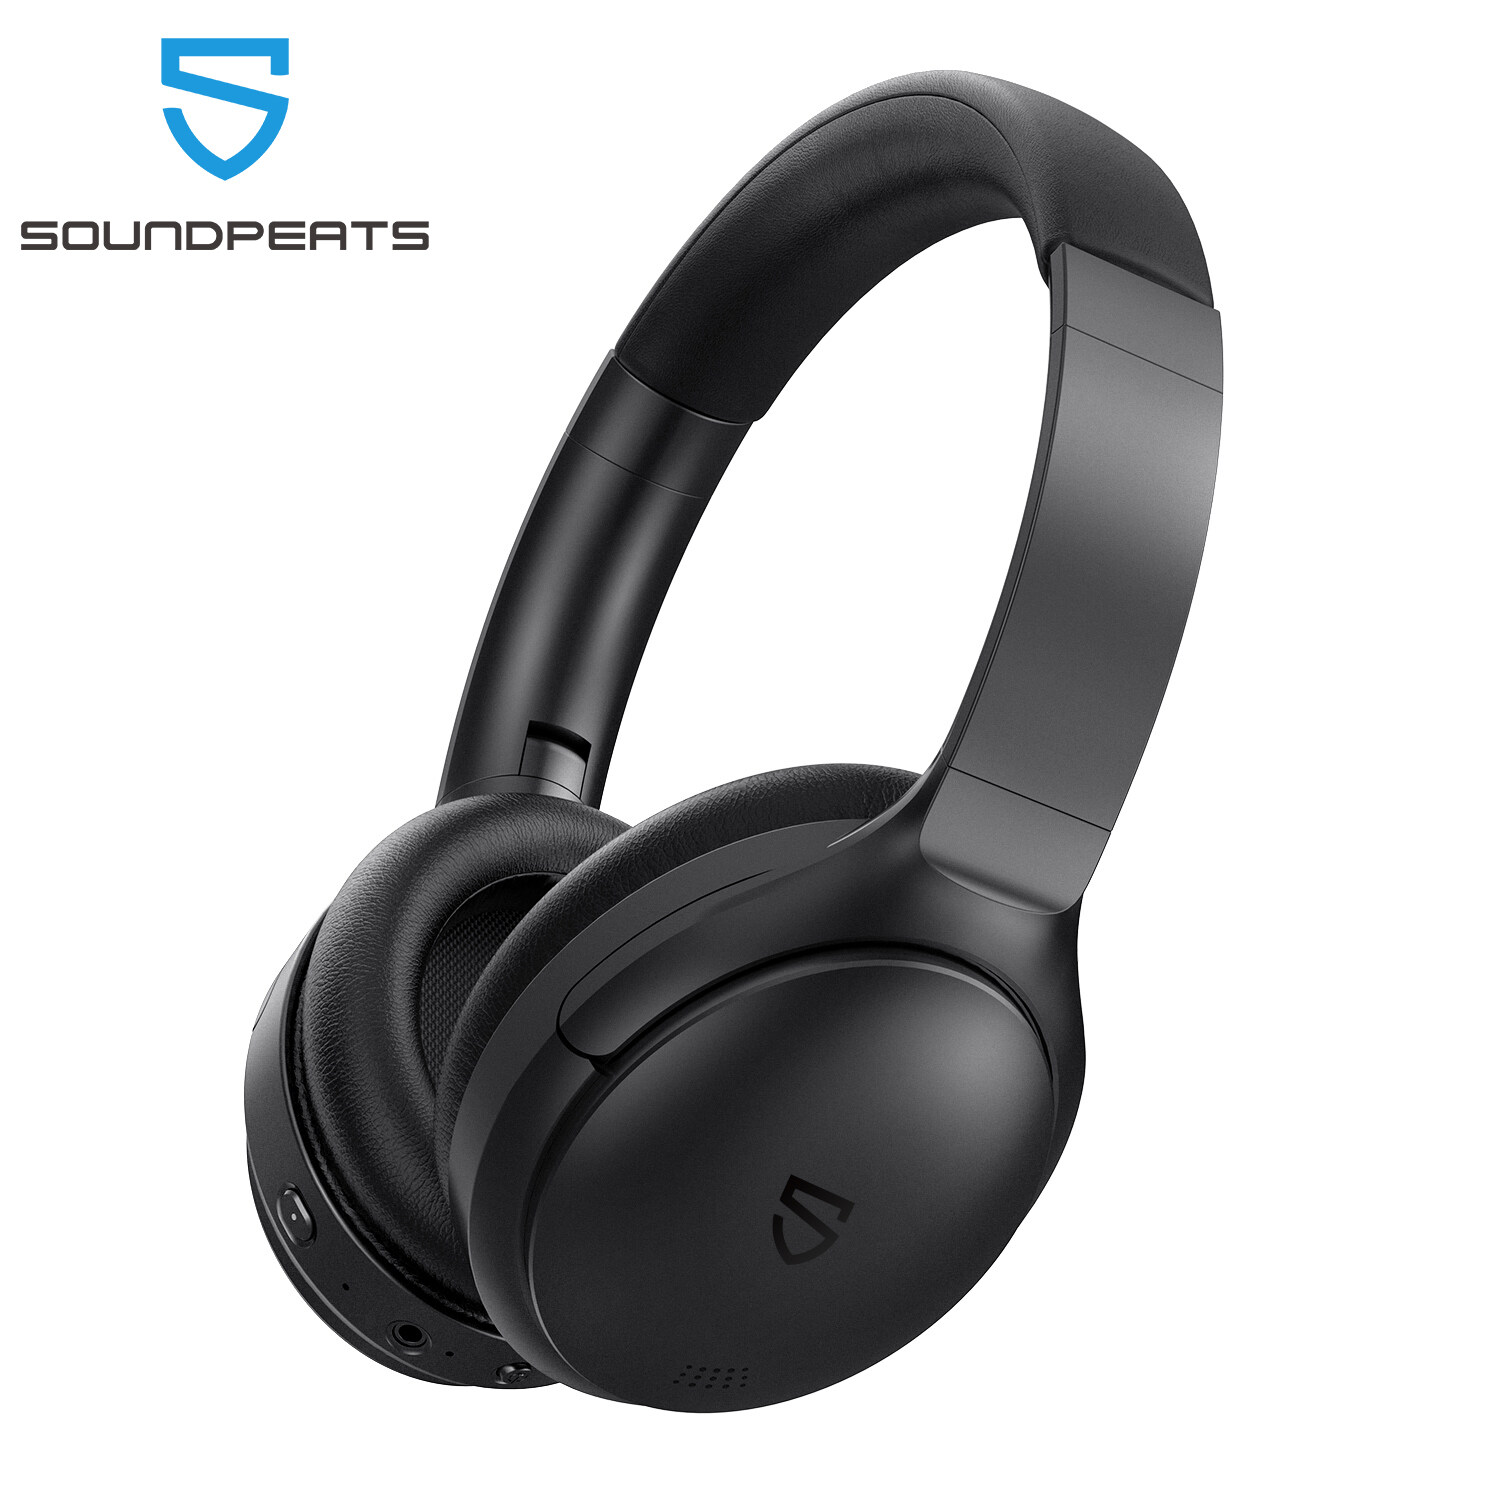 Soundpeats A6 Over The Ear Headphones With Hybrid Active Noise Cancellation